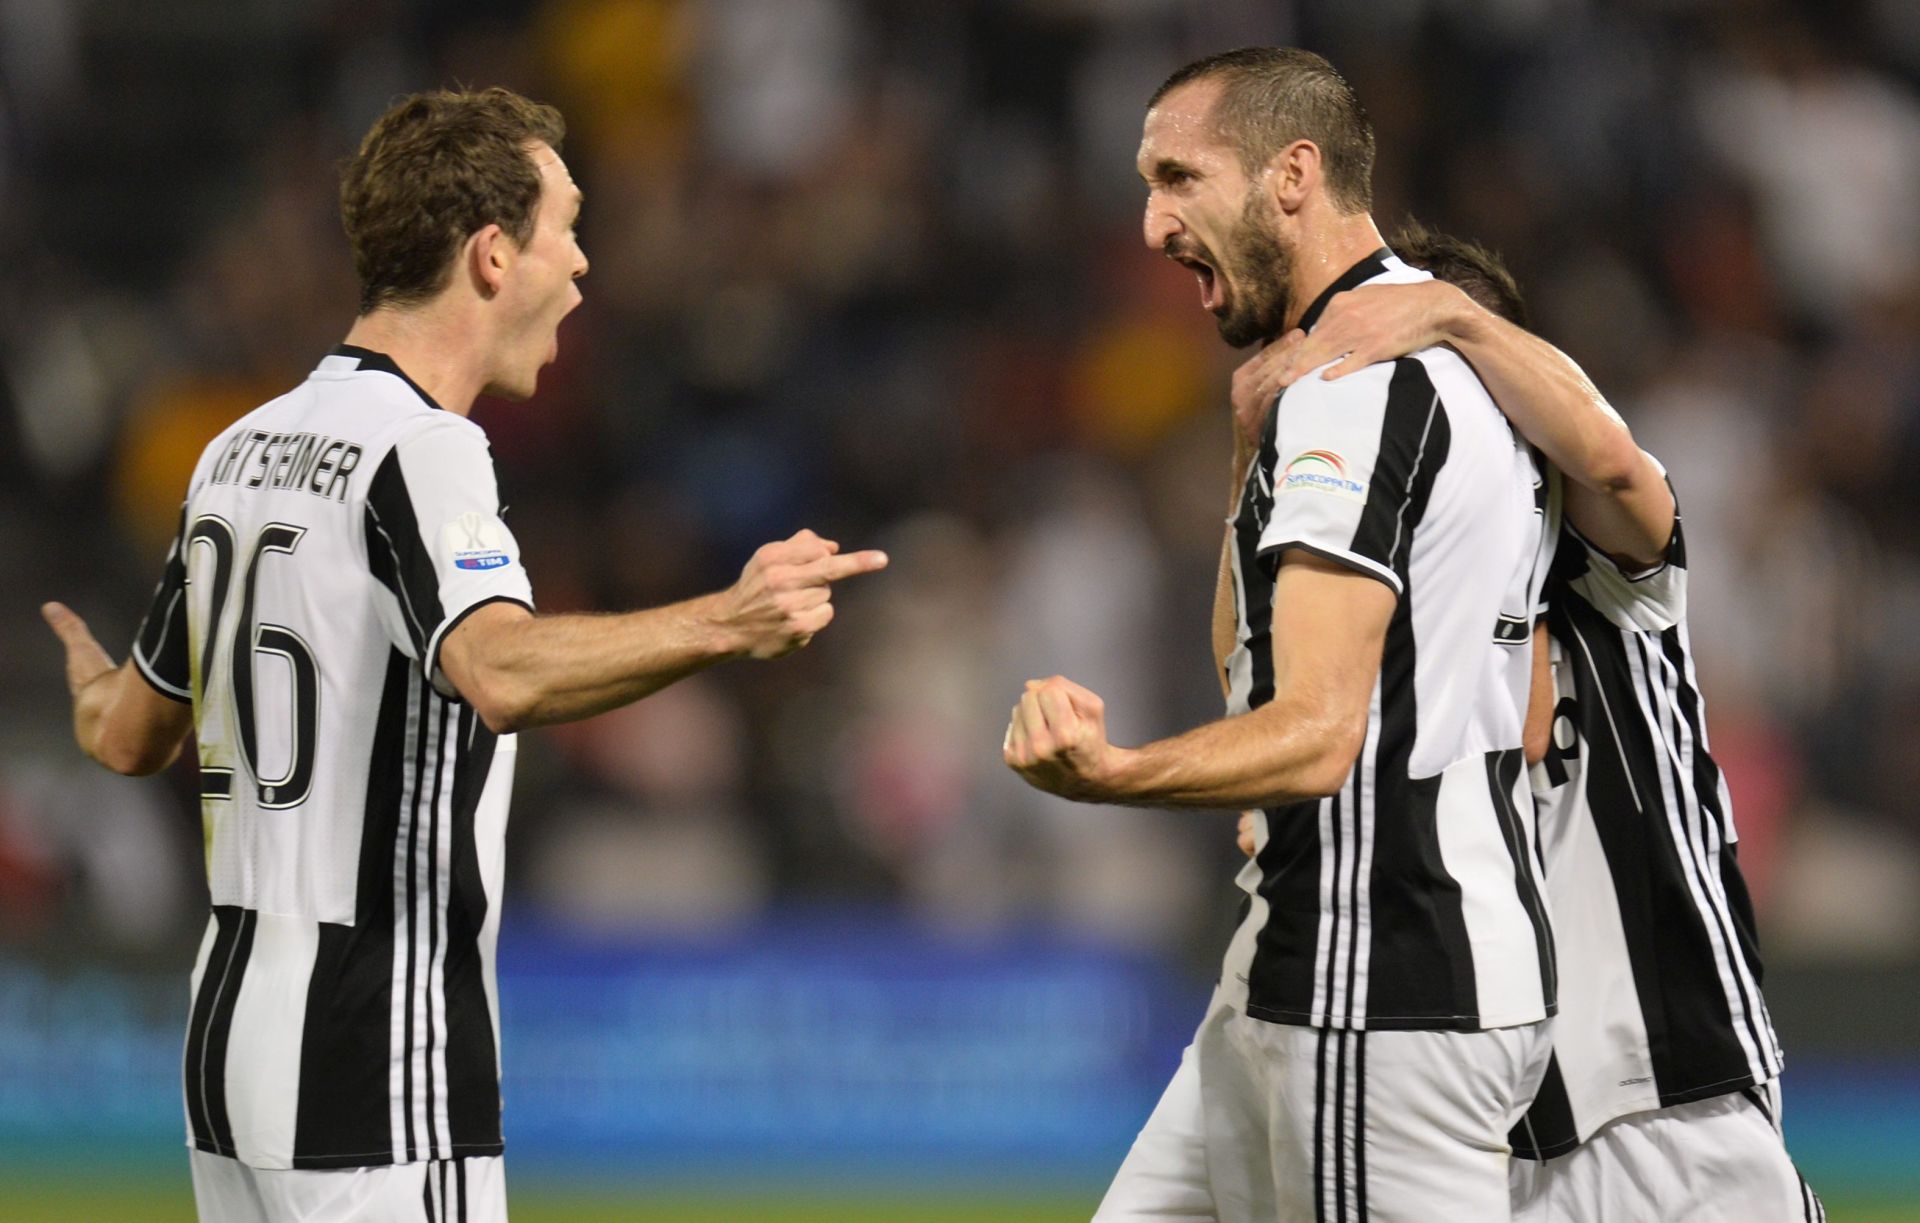 epa05686844 Juventus's Giorgio Chiellini (R) celebrates with his team mates after scoring the opening goal against A C Milan during the Italian Super Cup final soccer match between Juventus FC and A C Milan  at the Al Sadd stadium in Doha, Qatar, 23 December 2016.  EPA/Noushad Thekkayil